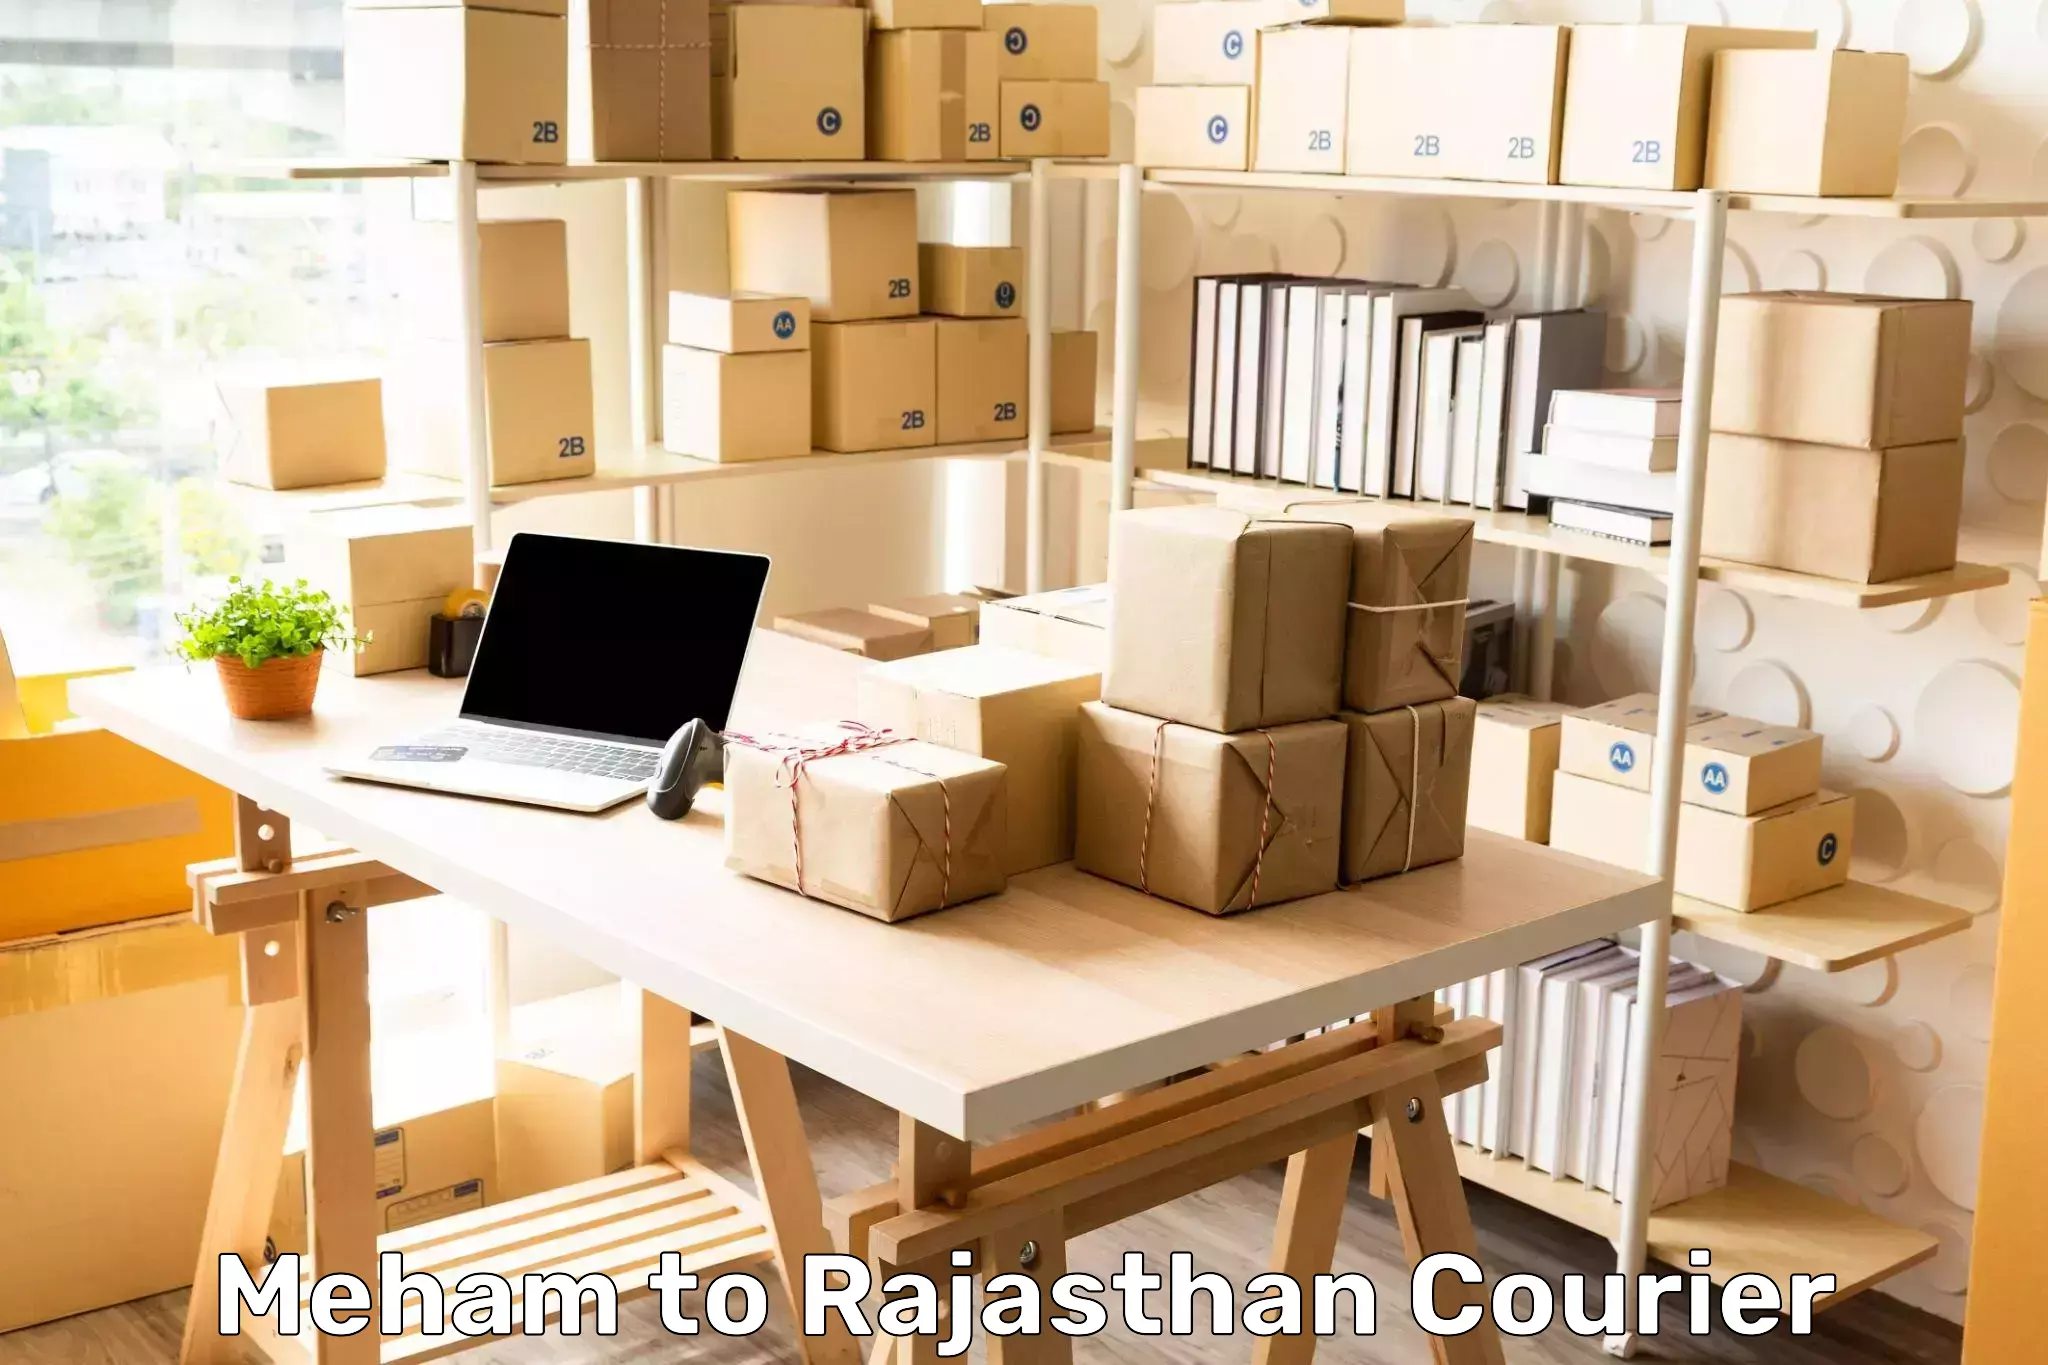 Sustainable shipping practices Meham to Rajasthan